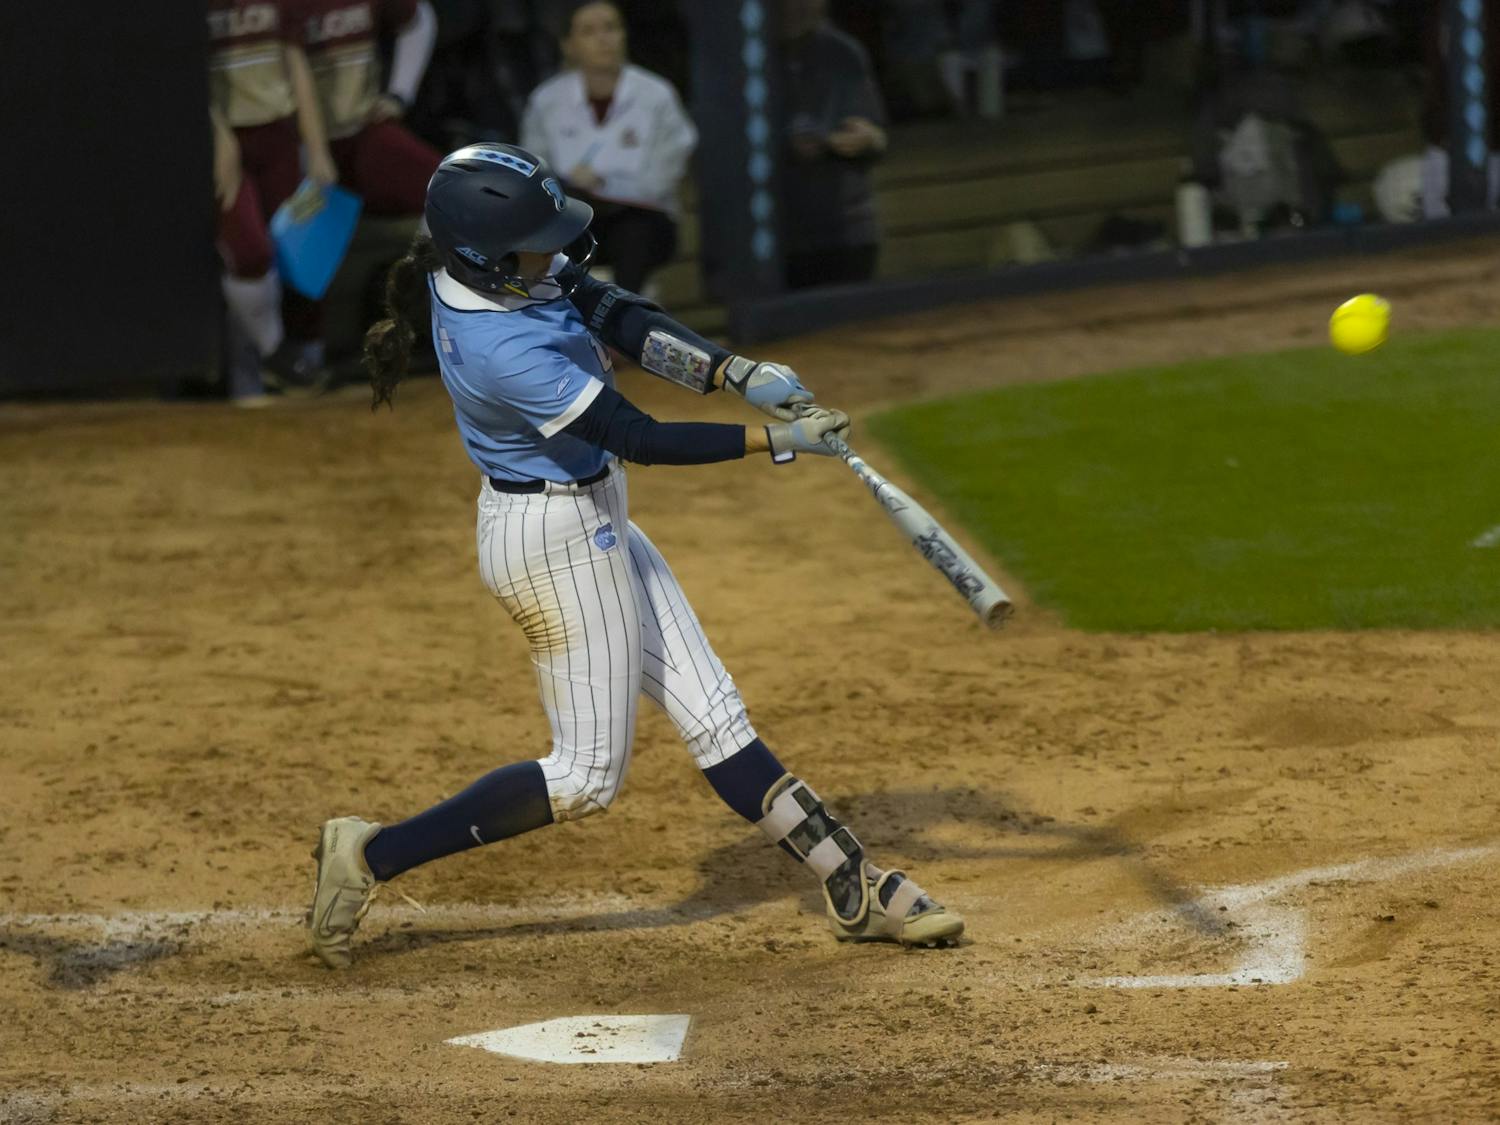 UNC fifth-year Kiersten Licea (1) hits the ball during the softball game against Elon at Anderson Stadium on Wednesday, Feb. 15, 2023. UNC beat Elon 9-5.